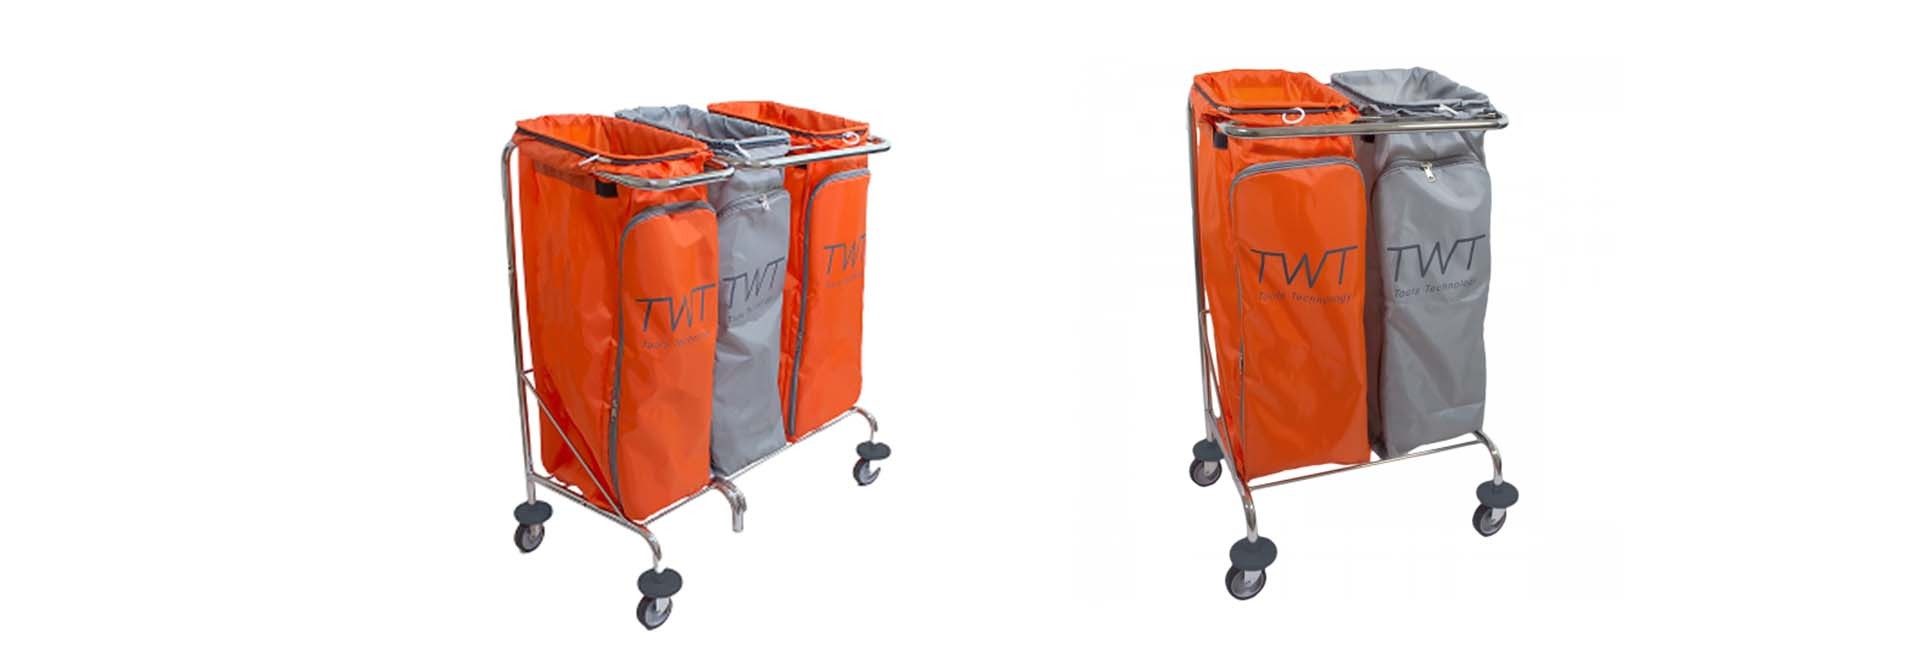 Multi Purpose Cleaning Trolley